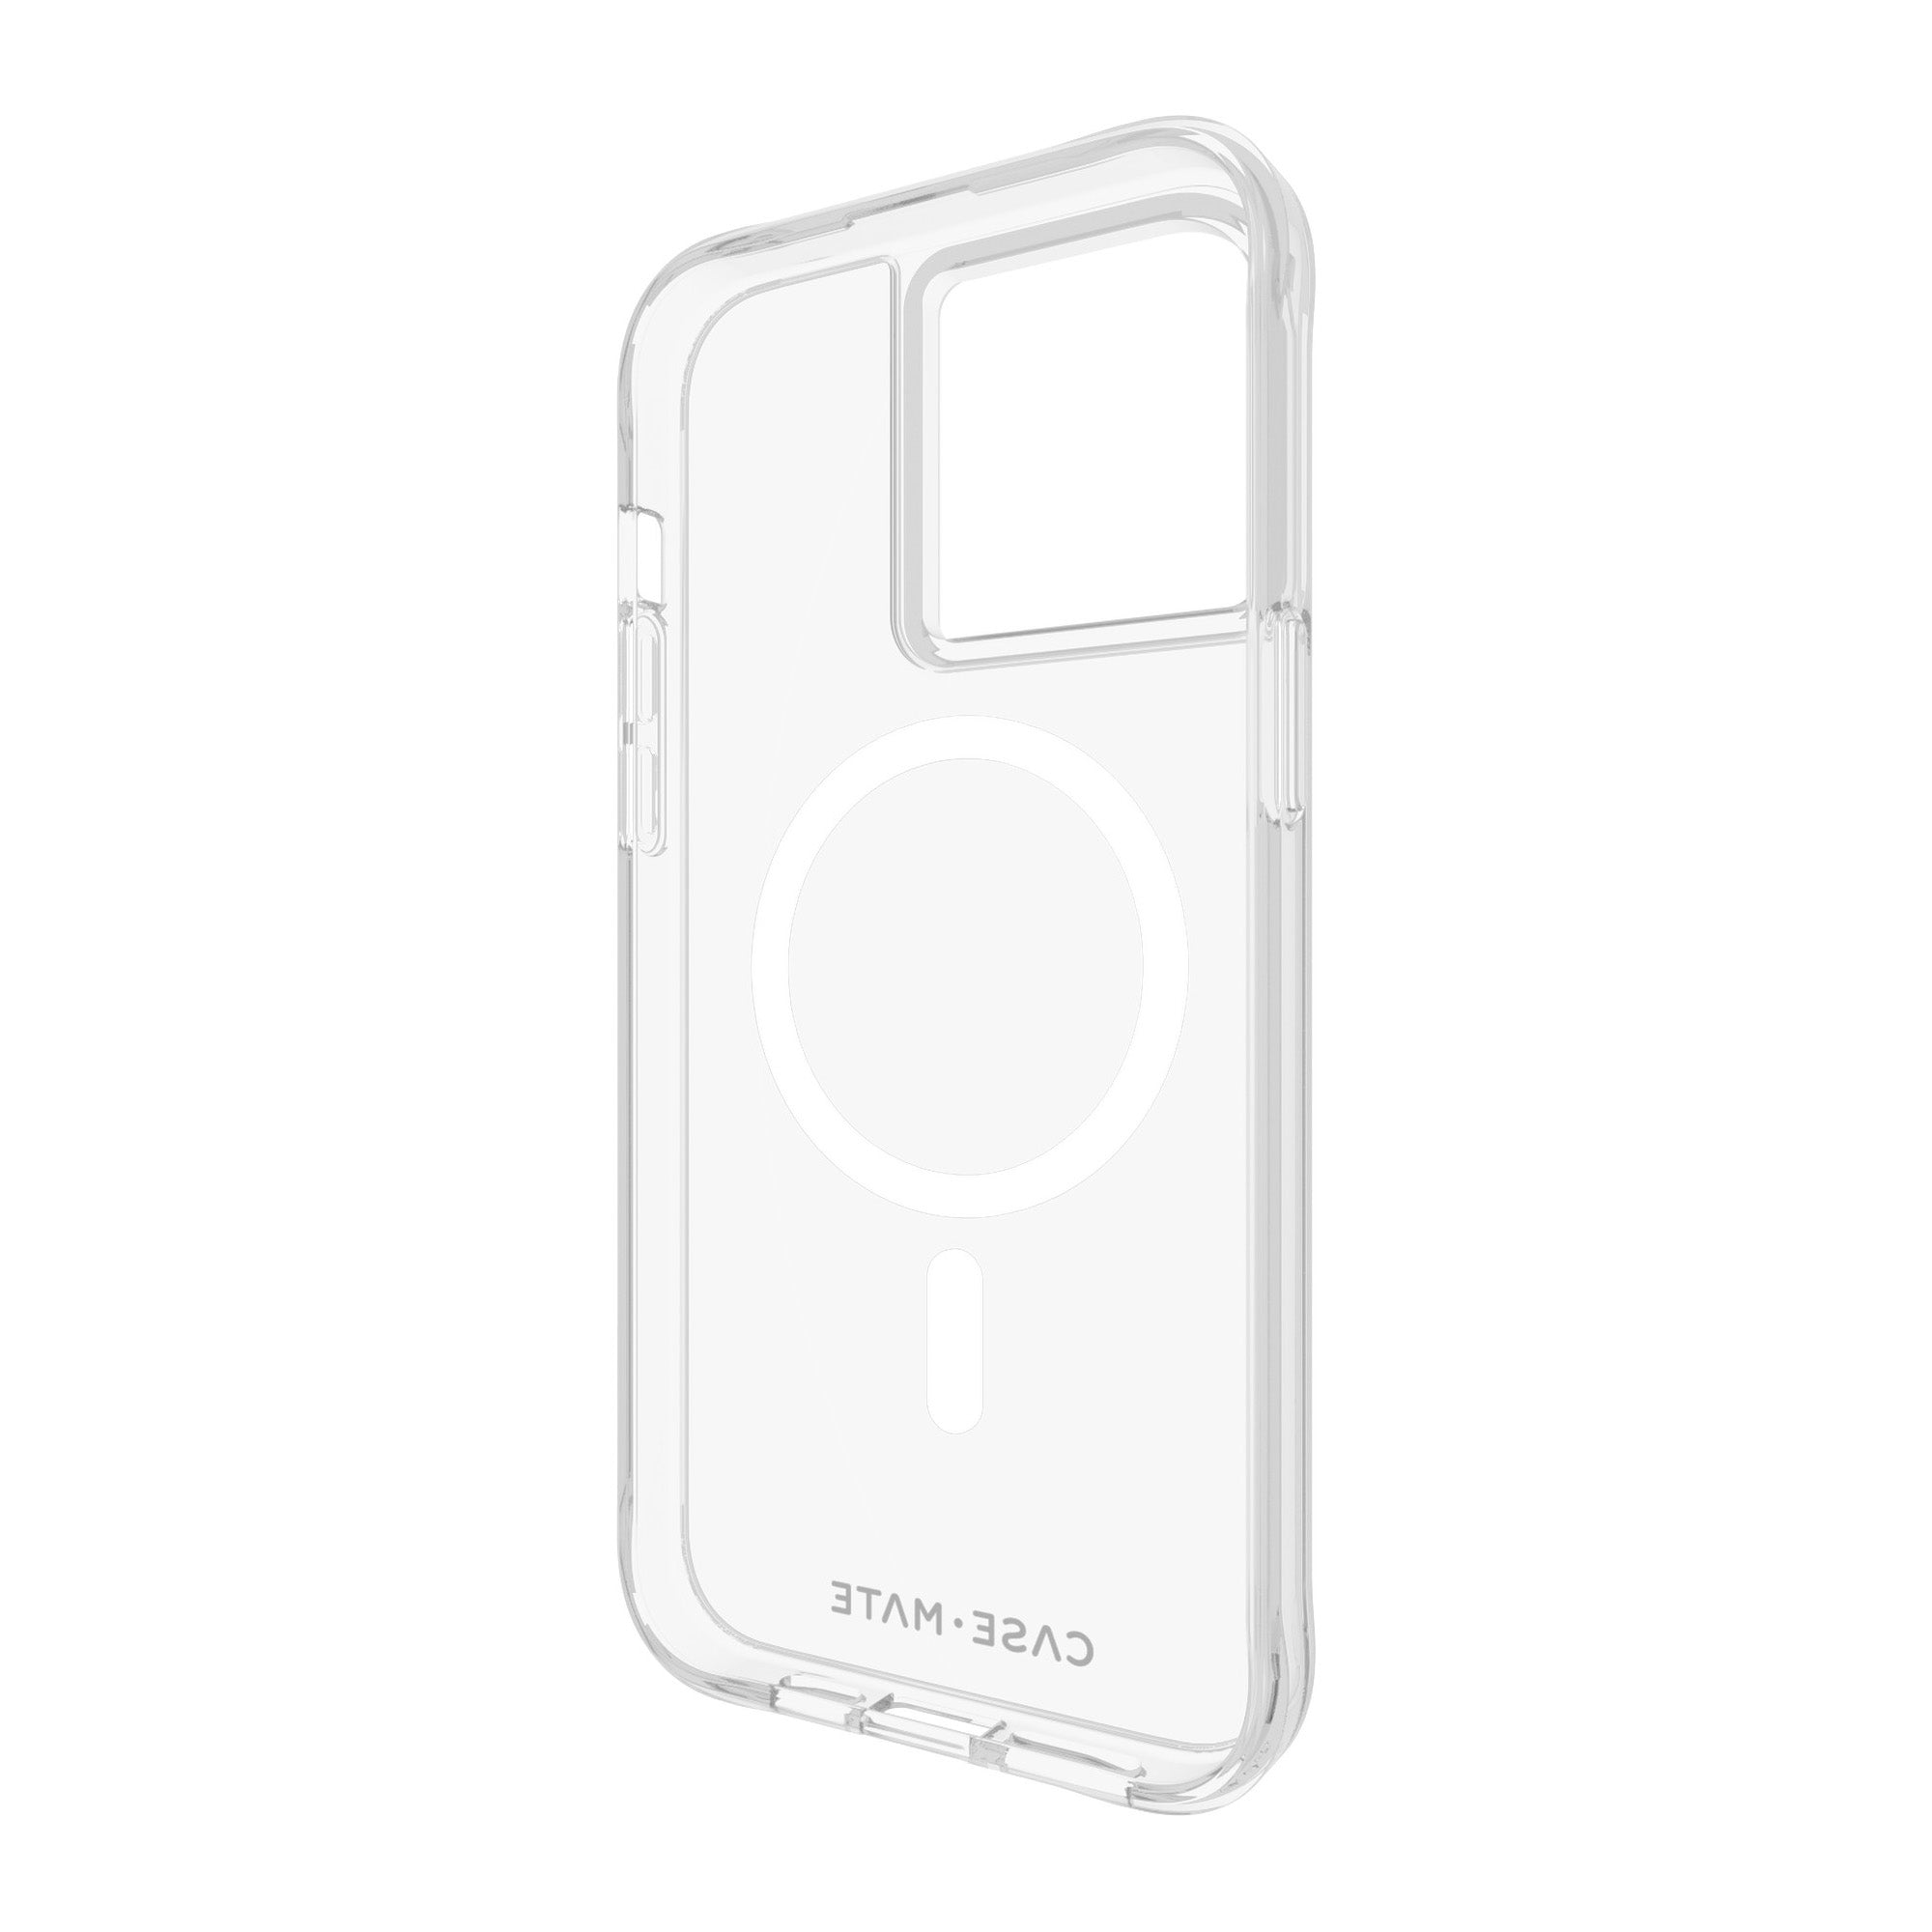 iPhone 15 Pro Max Case-Mate Tough MagSafe Case - Clear - 15-11484